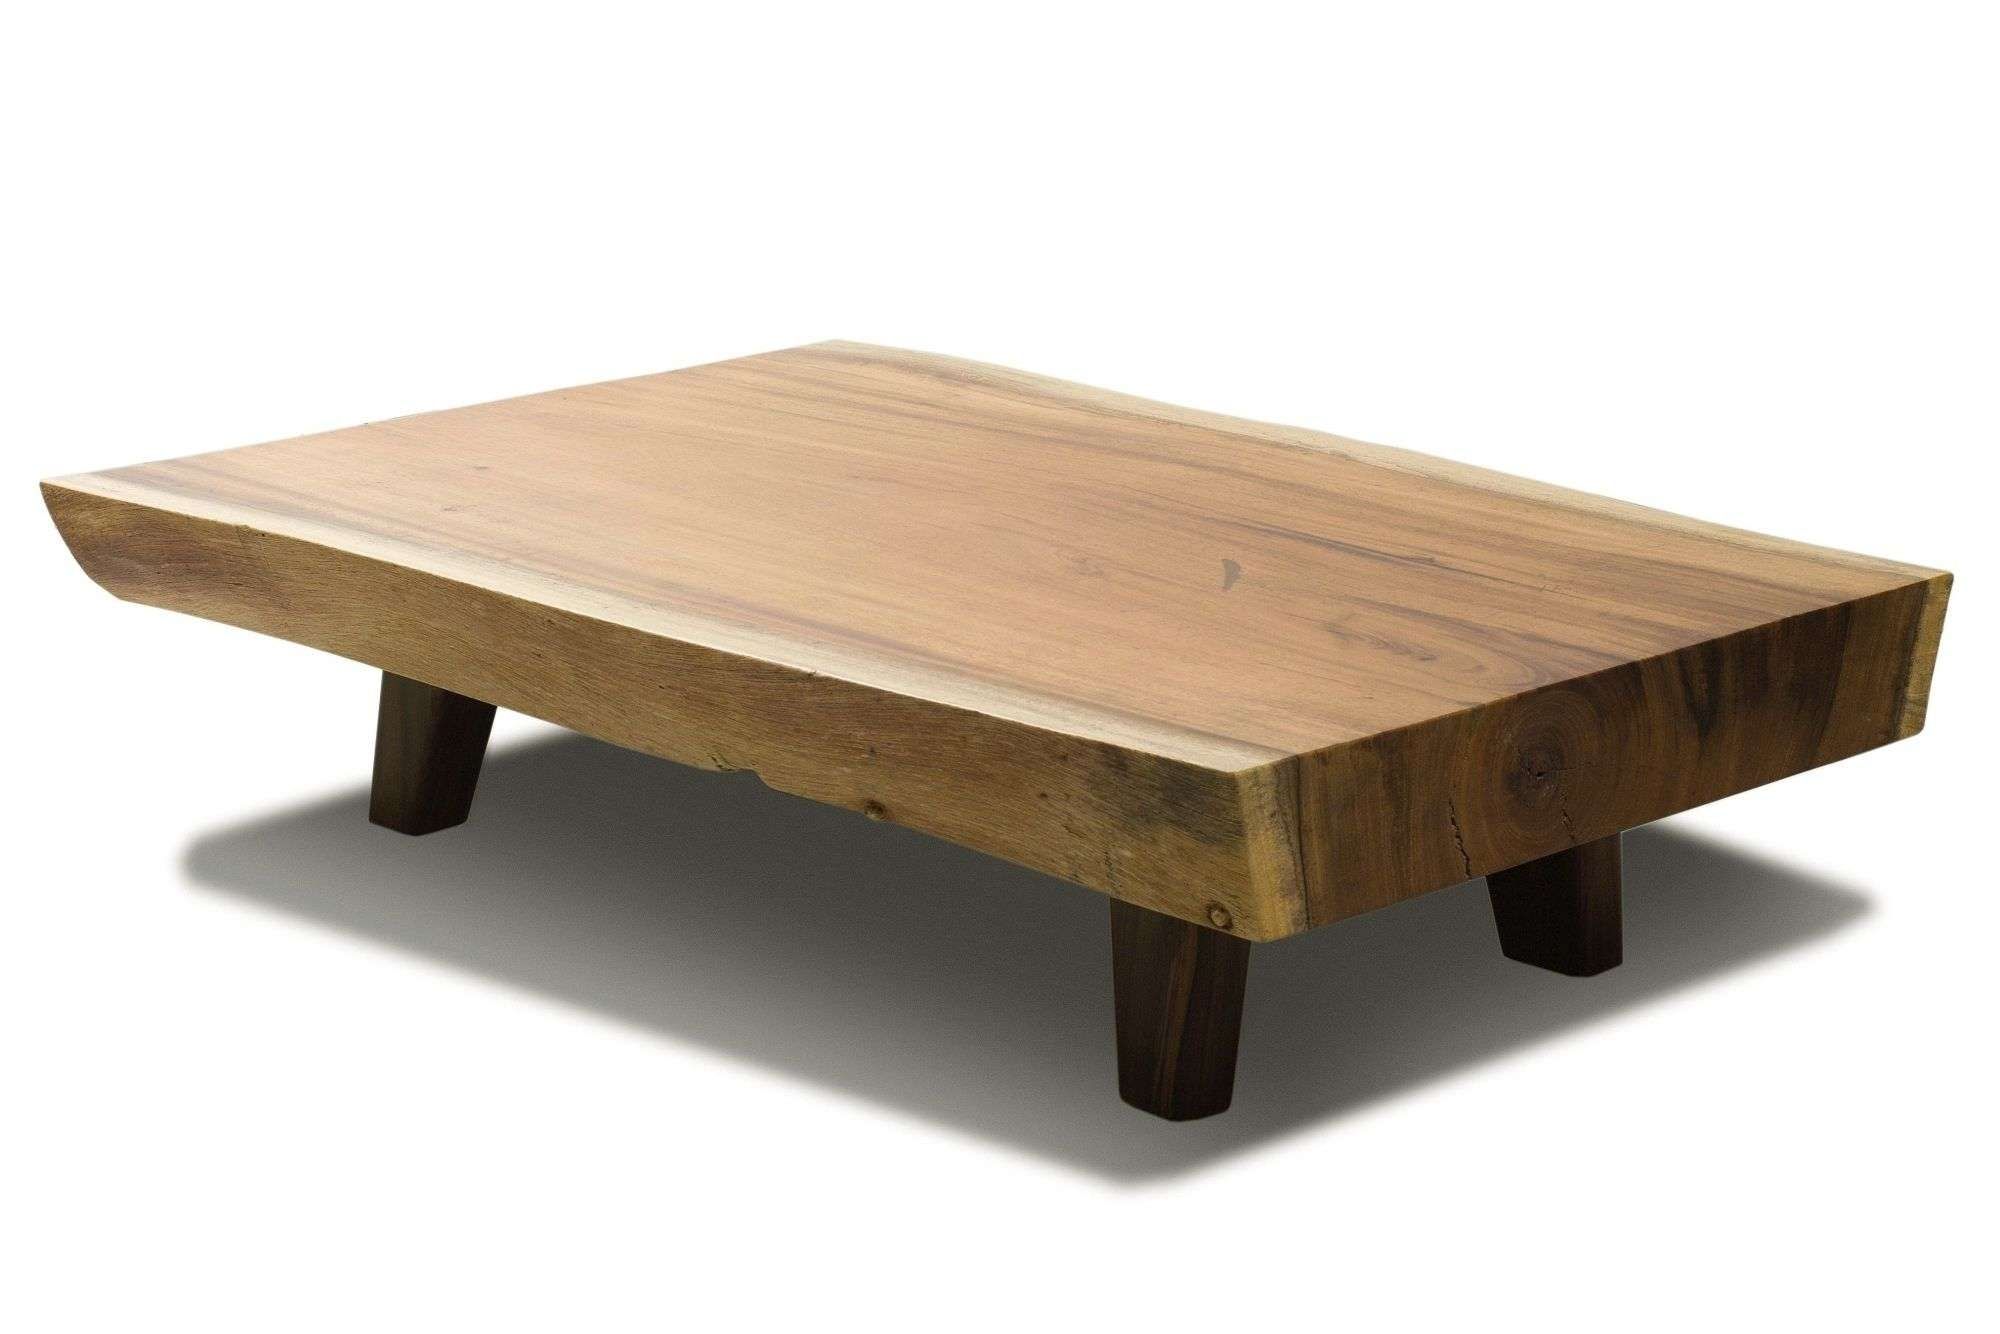 Coffee Table : Awesome Rustic Round Coffee Table Square Coffee With Regard To 2017 Low Wood Coffee Tables (View 4 of 20)